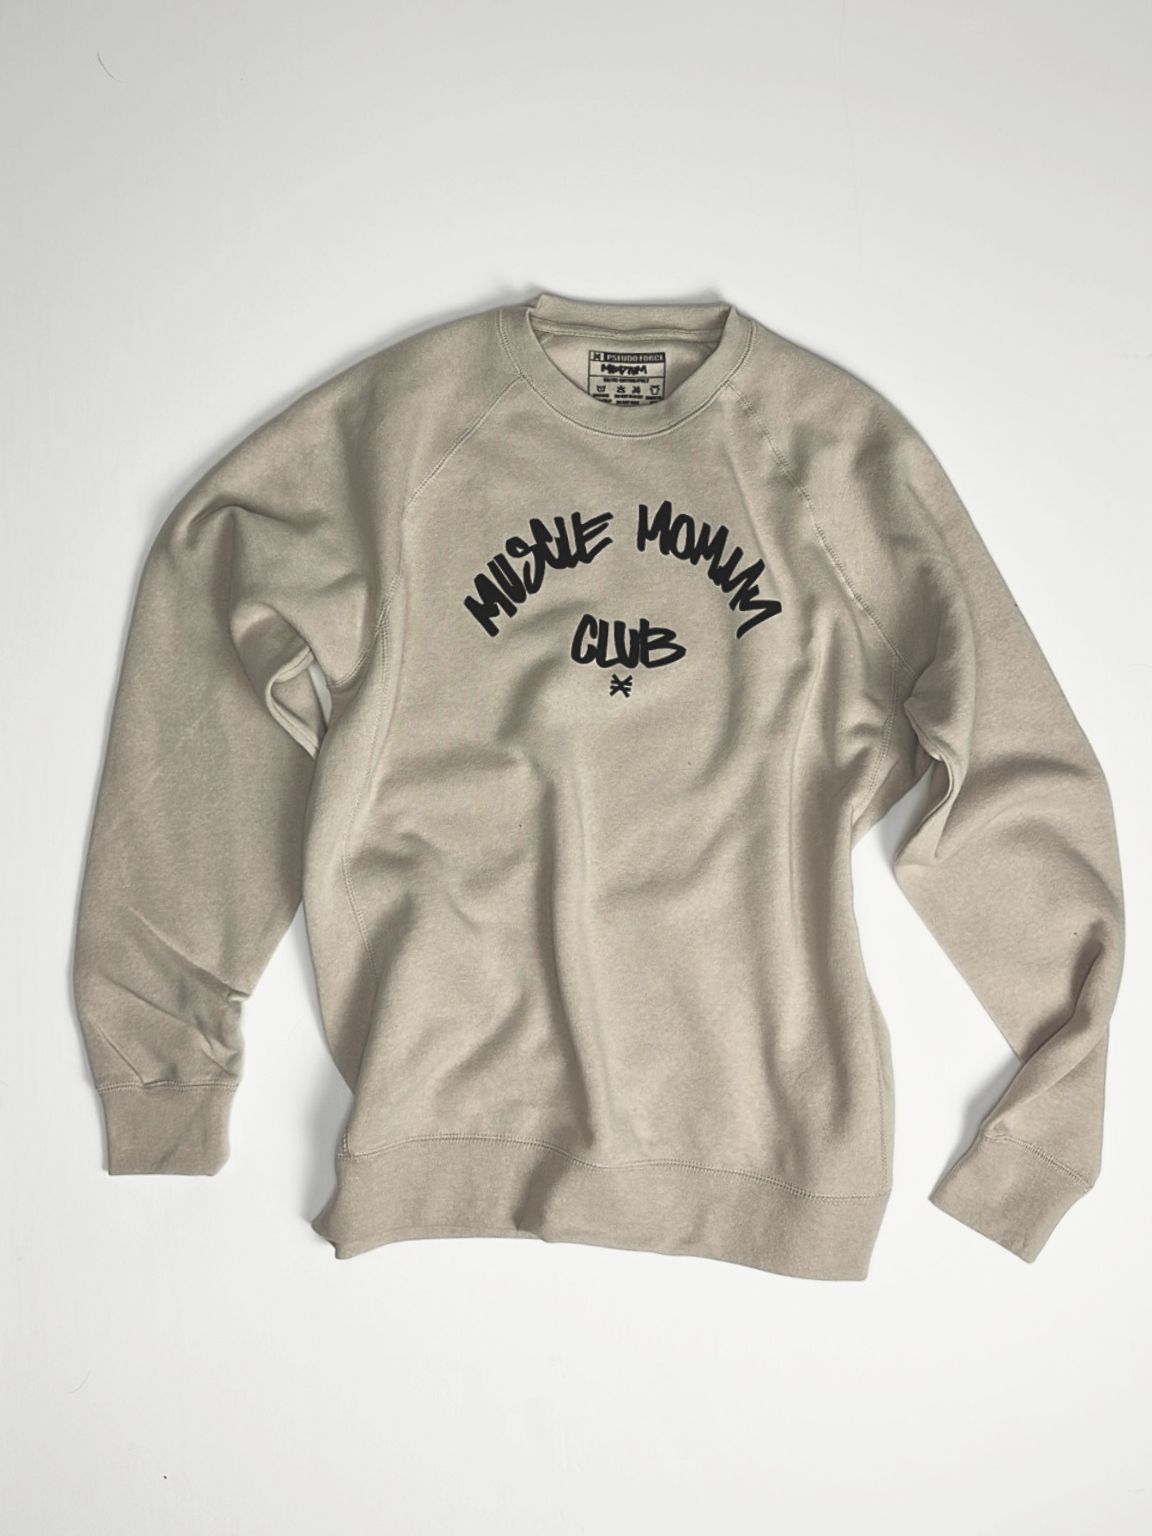 MUSCLE MOMMY CLUB CREWNECK NEUTRAL